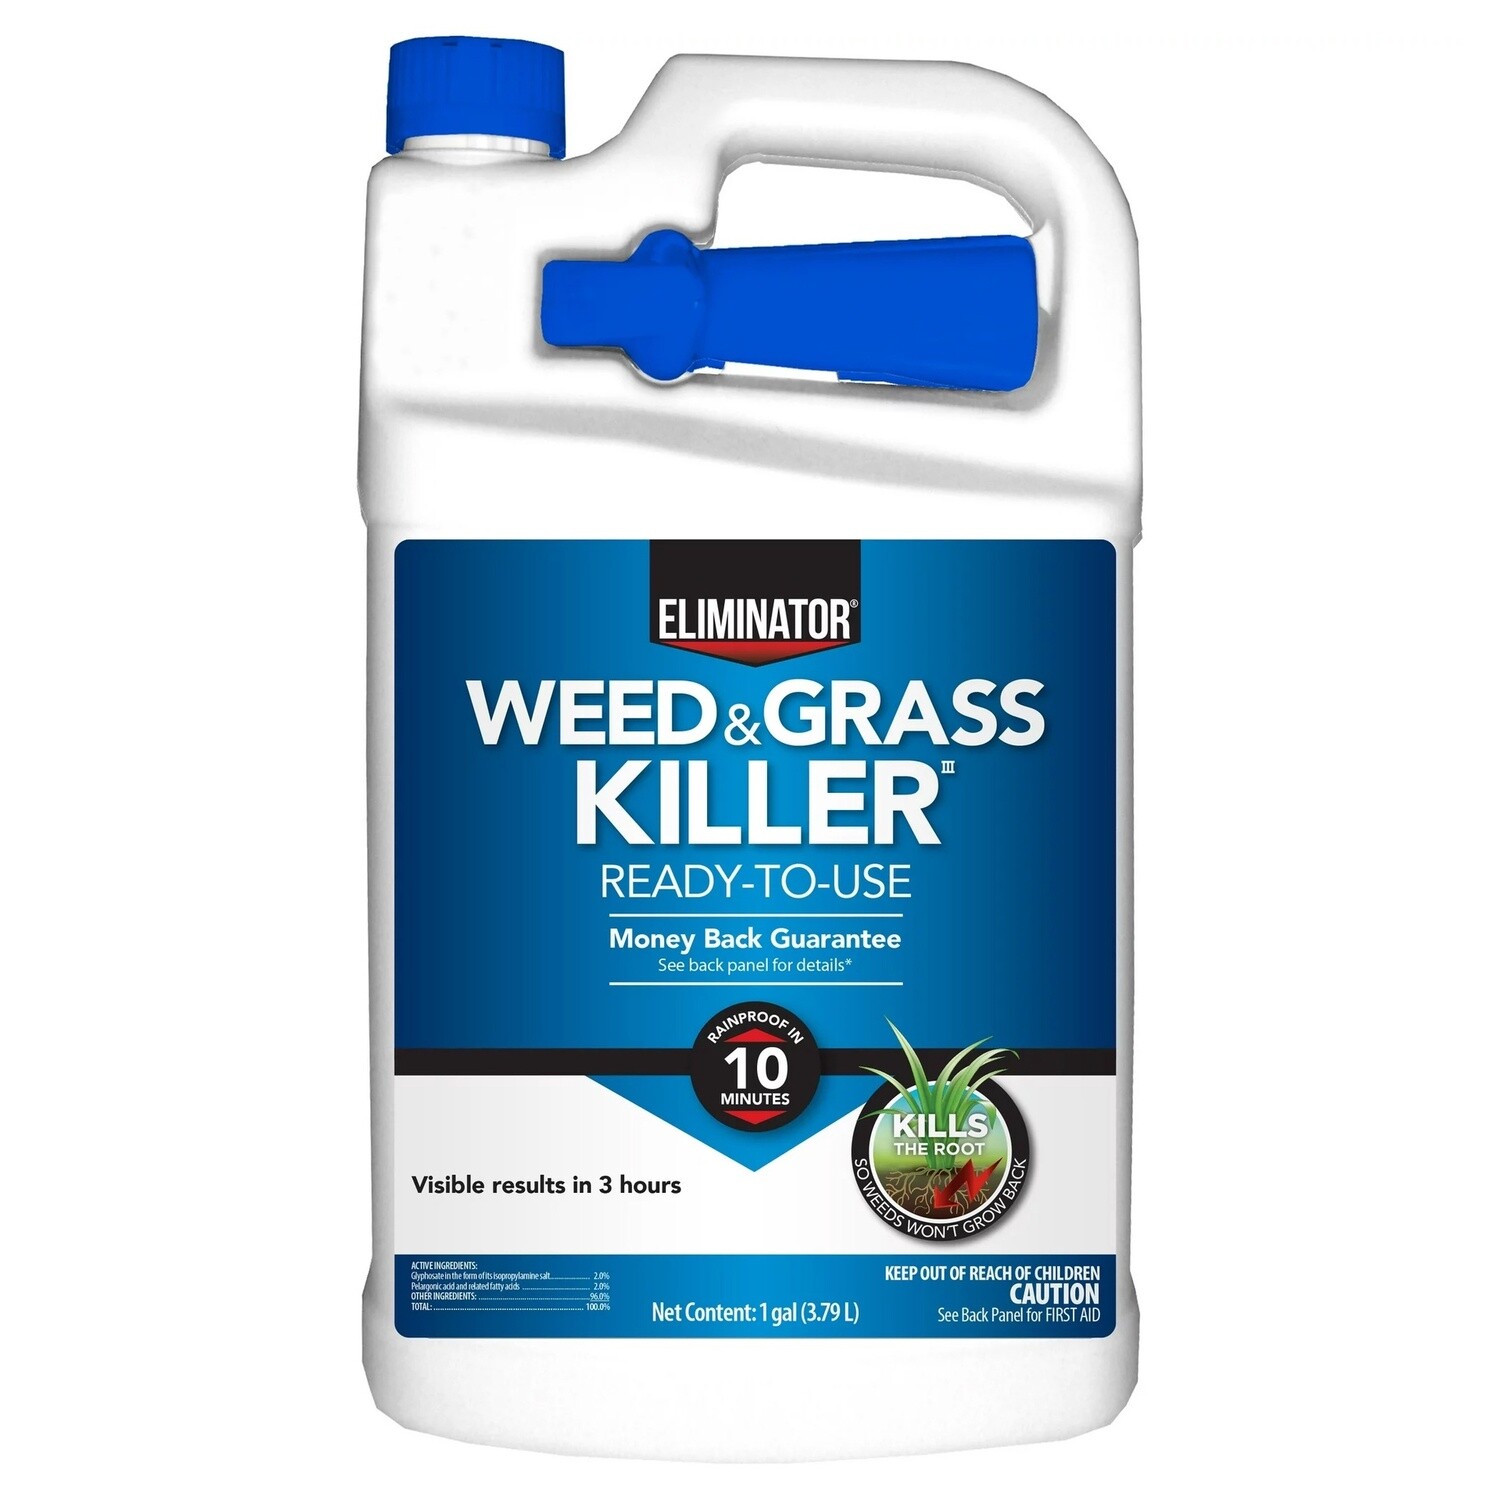 Eliminator Weed & Grass Killer Ready-to-Use 1-Gallon